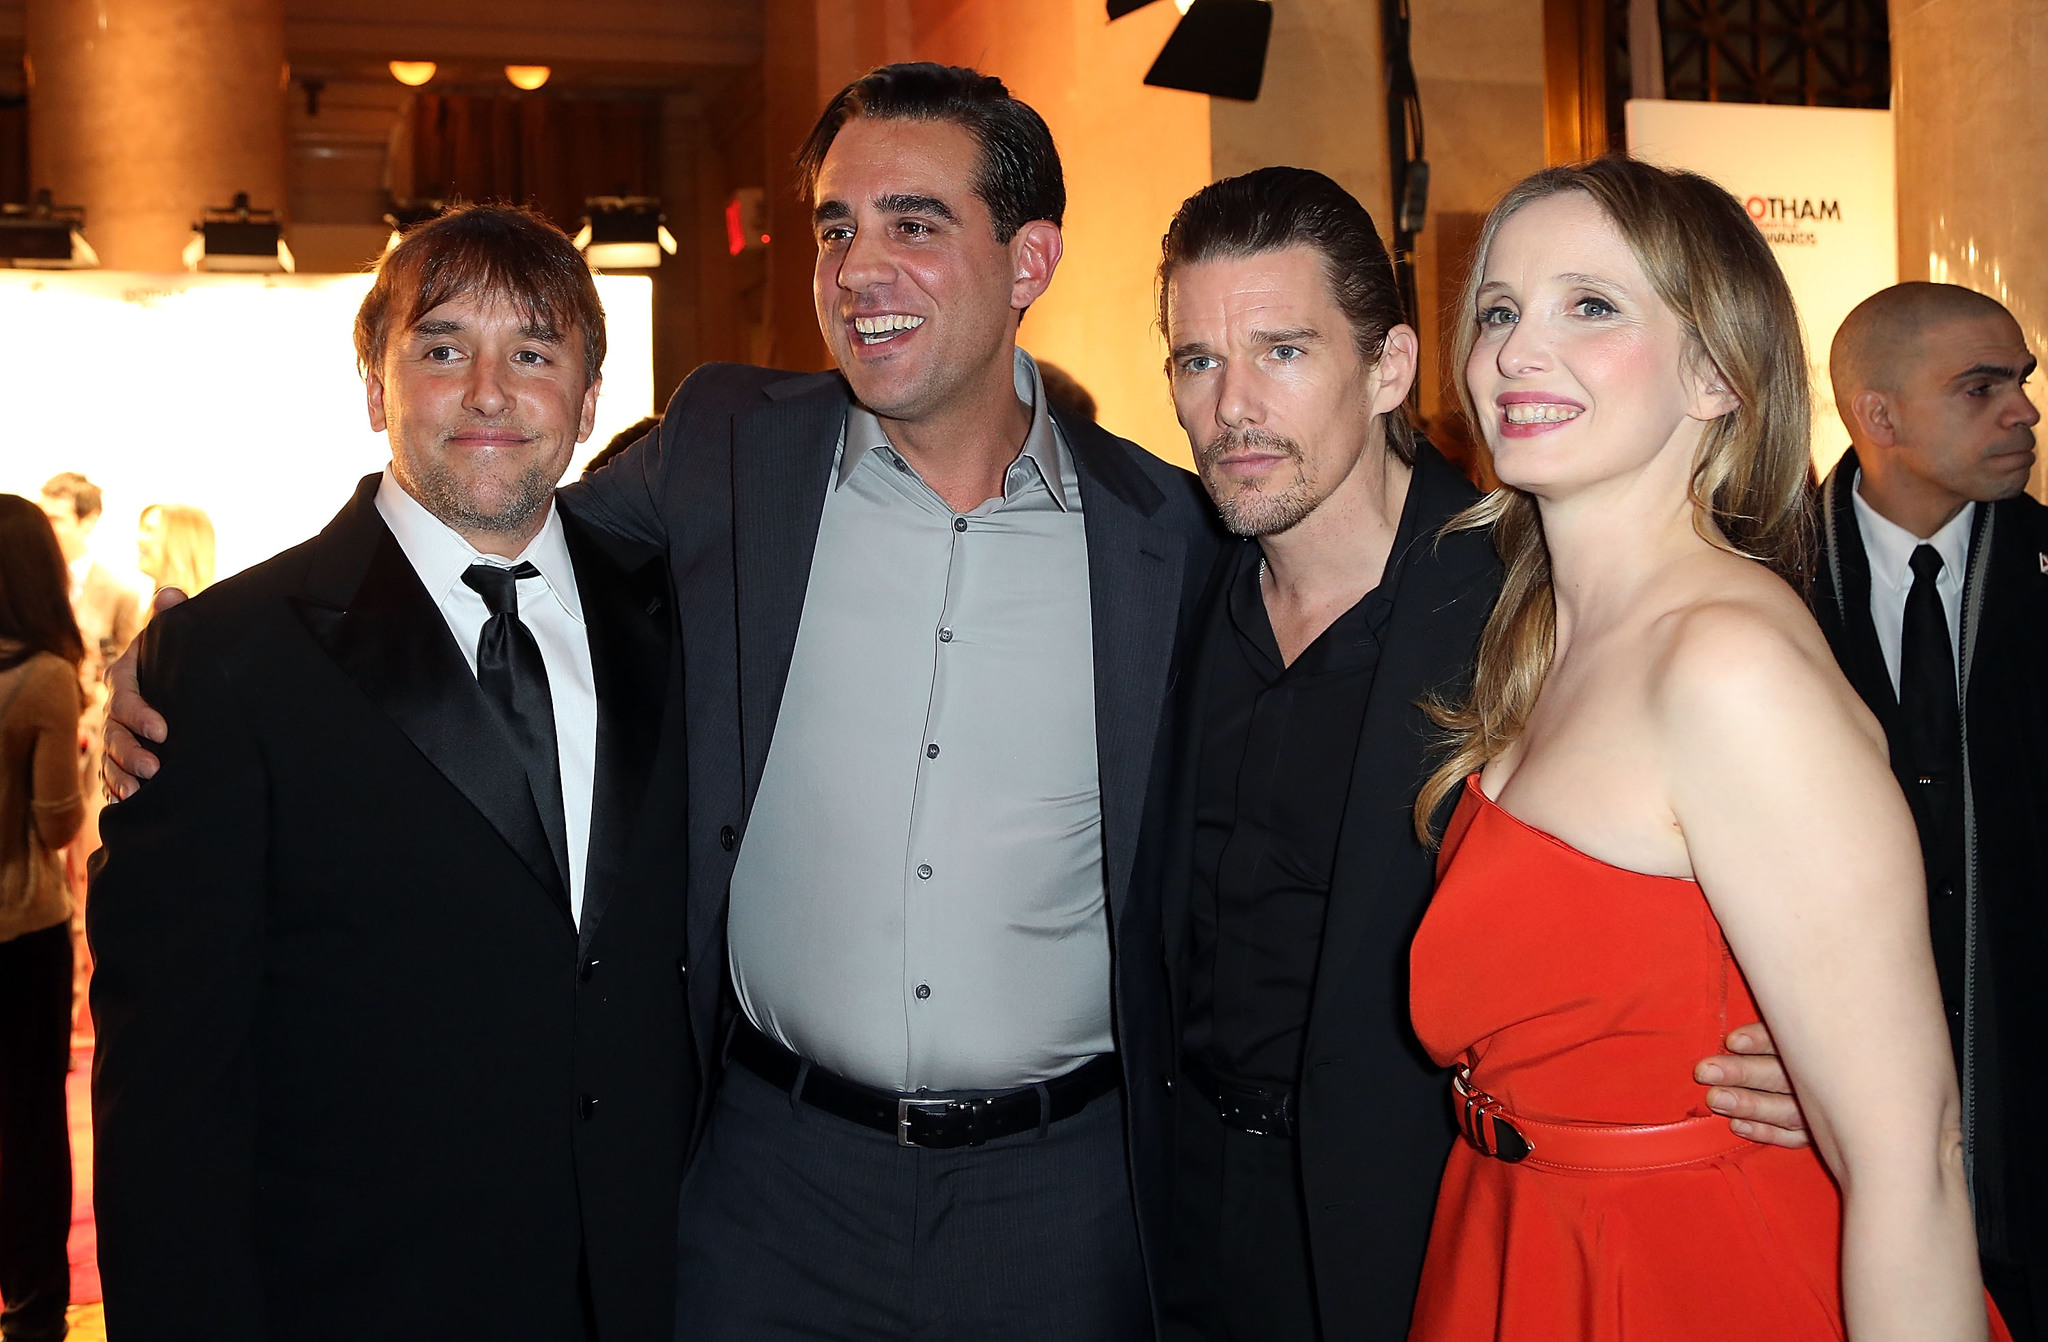 Ethan Hawke, Julie Delpy, Richard Linklater and Bobby Cannavale